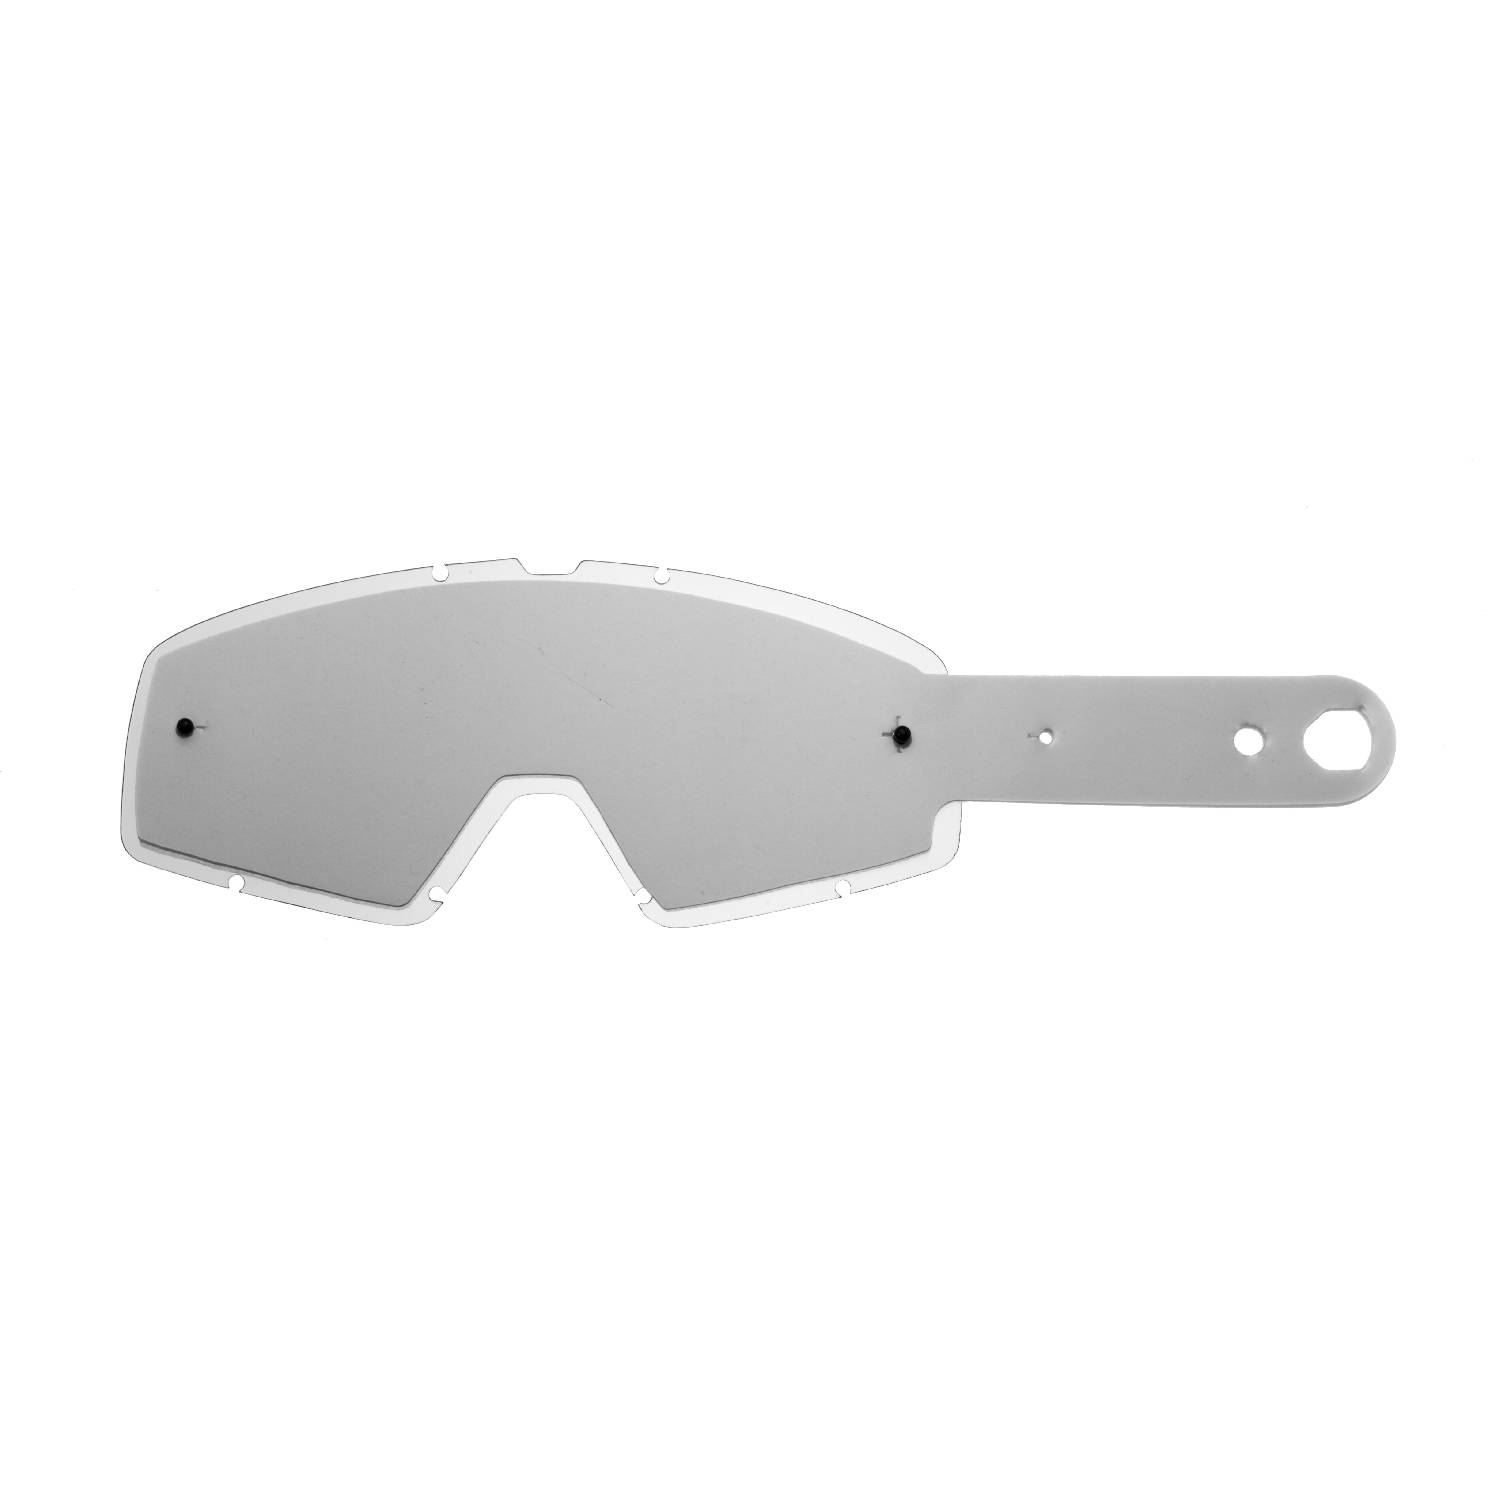 combo lenses with clear lenses with 10 tear off compatible for Fox Main Pro Mx goggle